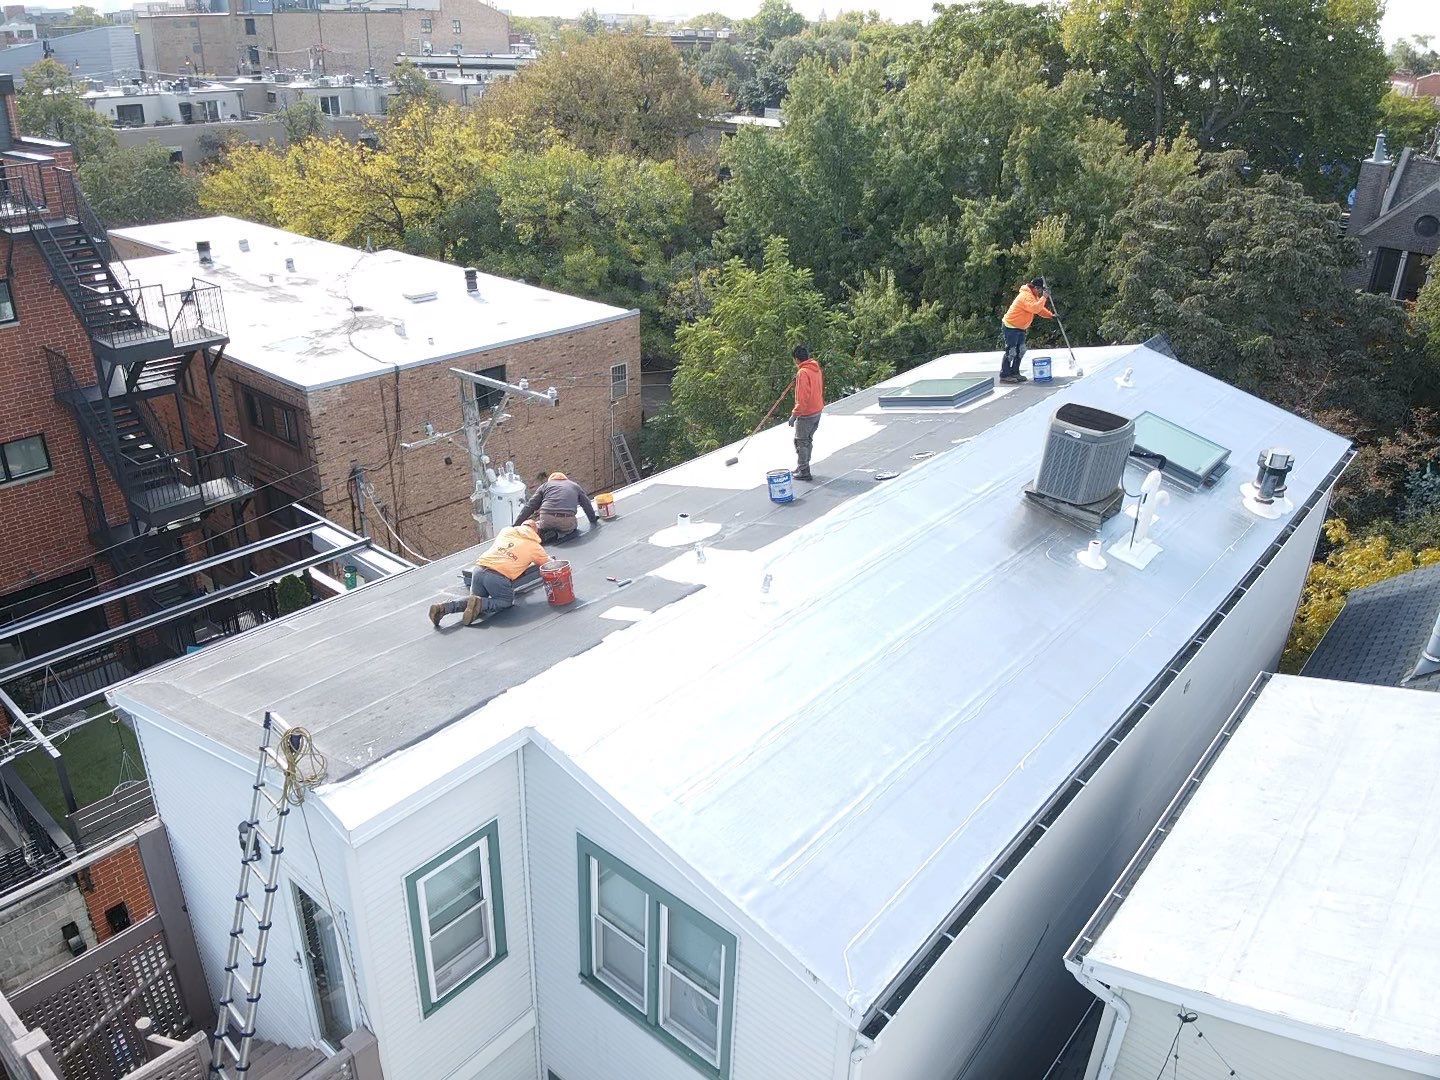 A group of people are working on the roof of a building.